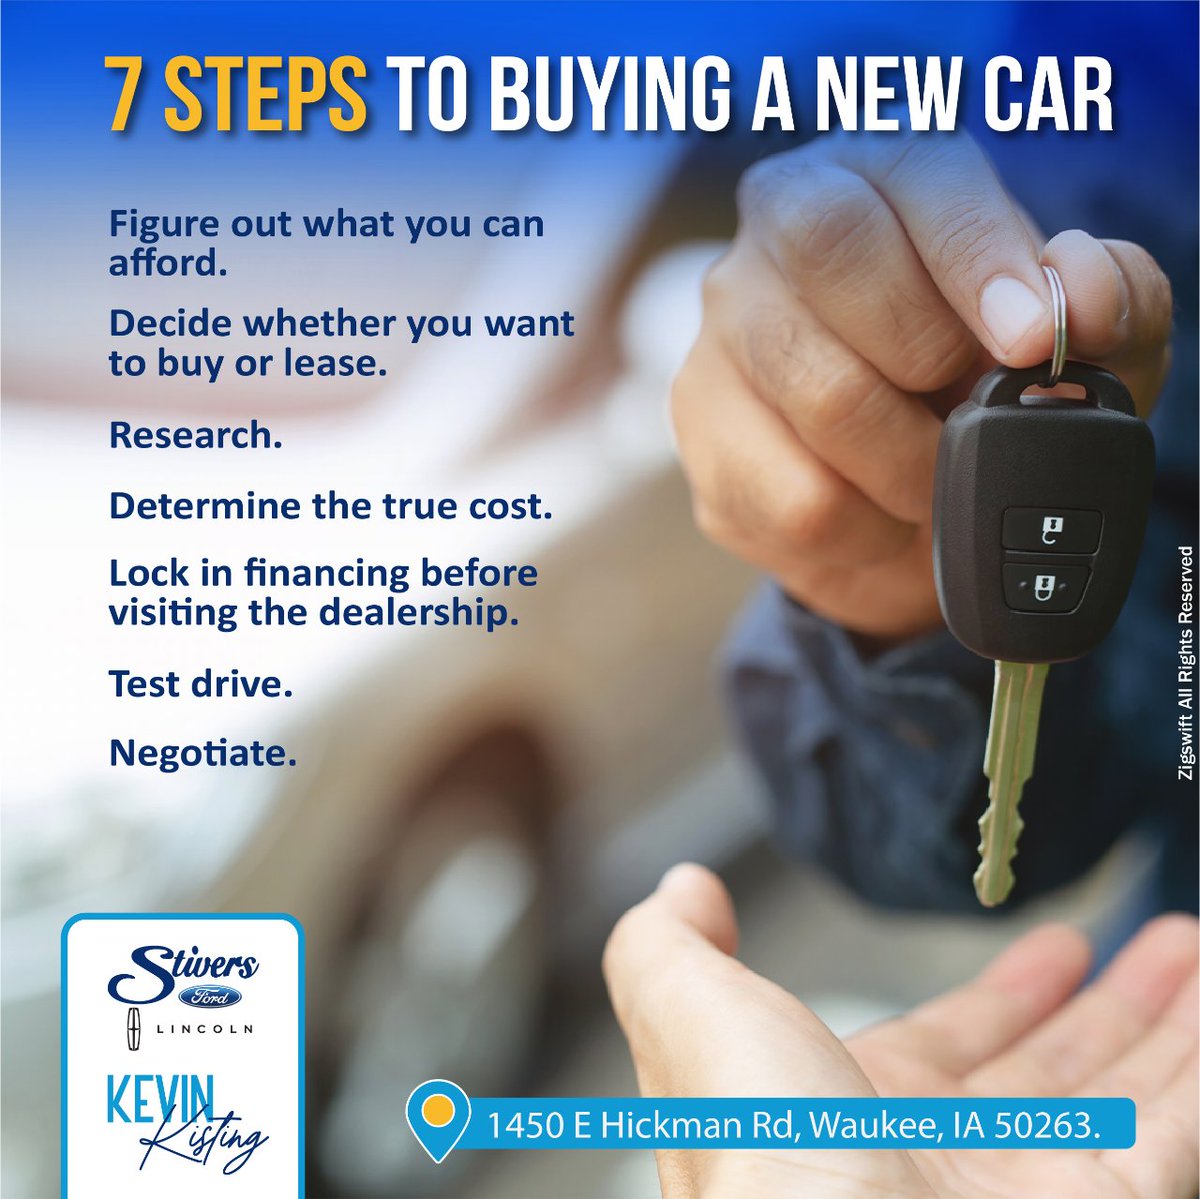 When you're ready to buy, follow these seven tips to make the most of the car-buying experience and walk away with the vehicle of your dreams at a price that fits your budget.

Reach Kevin at 563-552-6646 for more details.

#StiversFordLincoln #KevinCARes #buyingacar